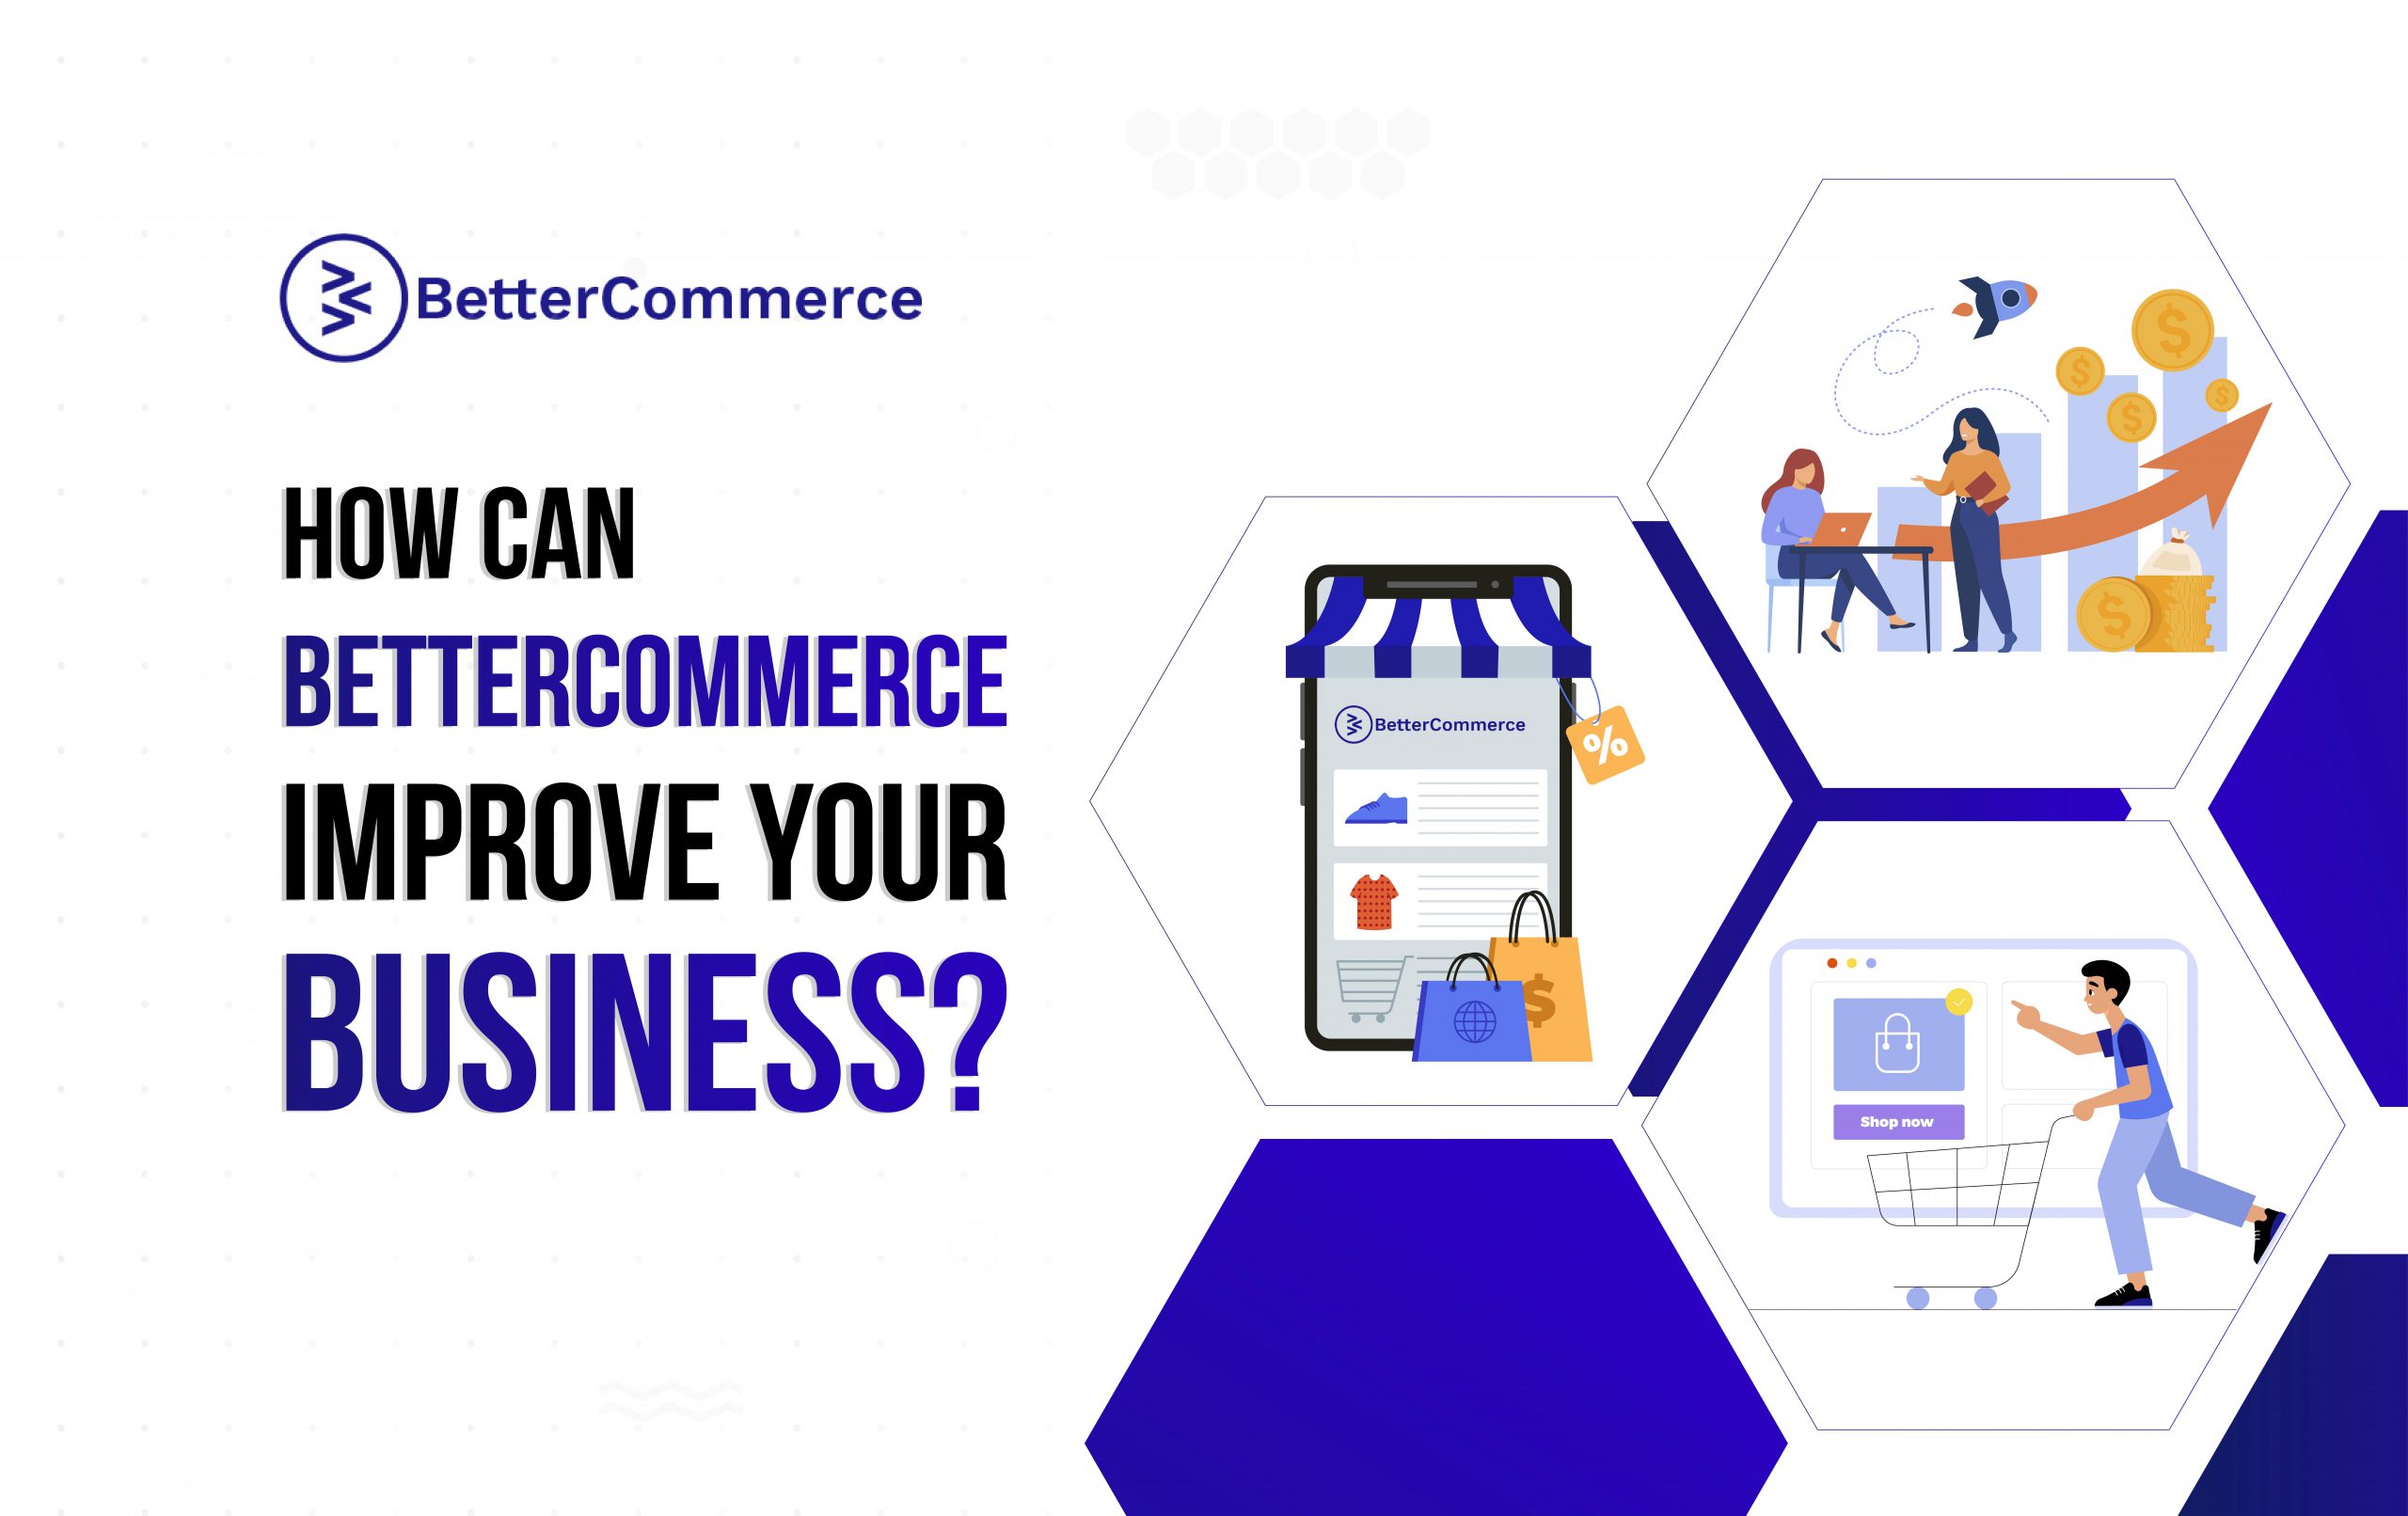 How can BetterCommerce improve your business?